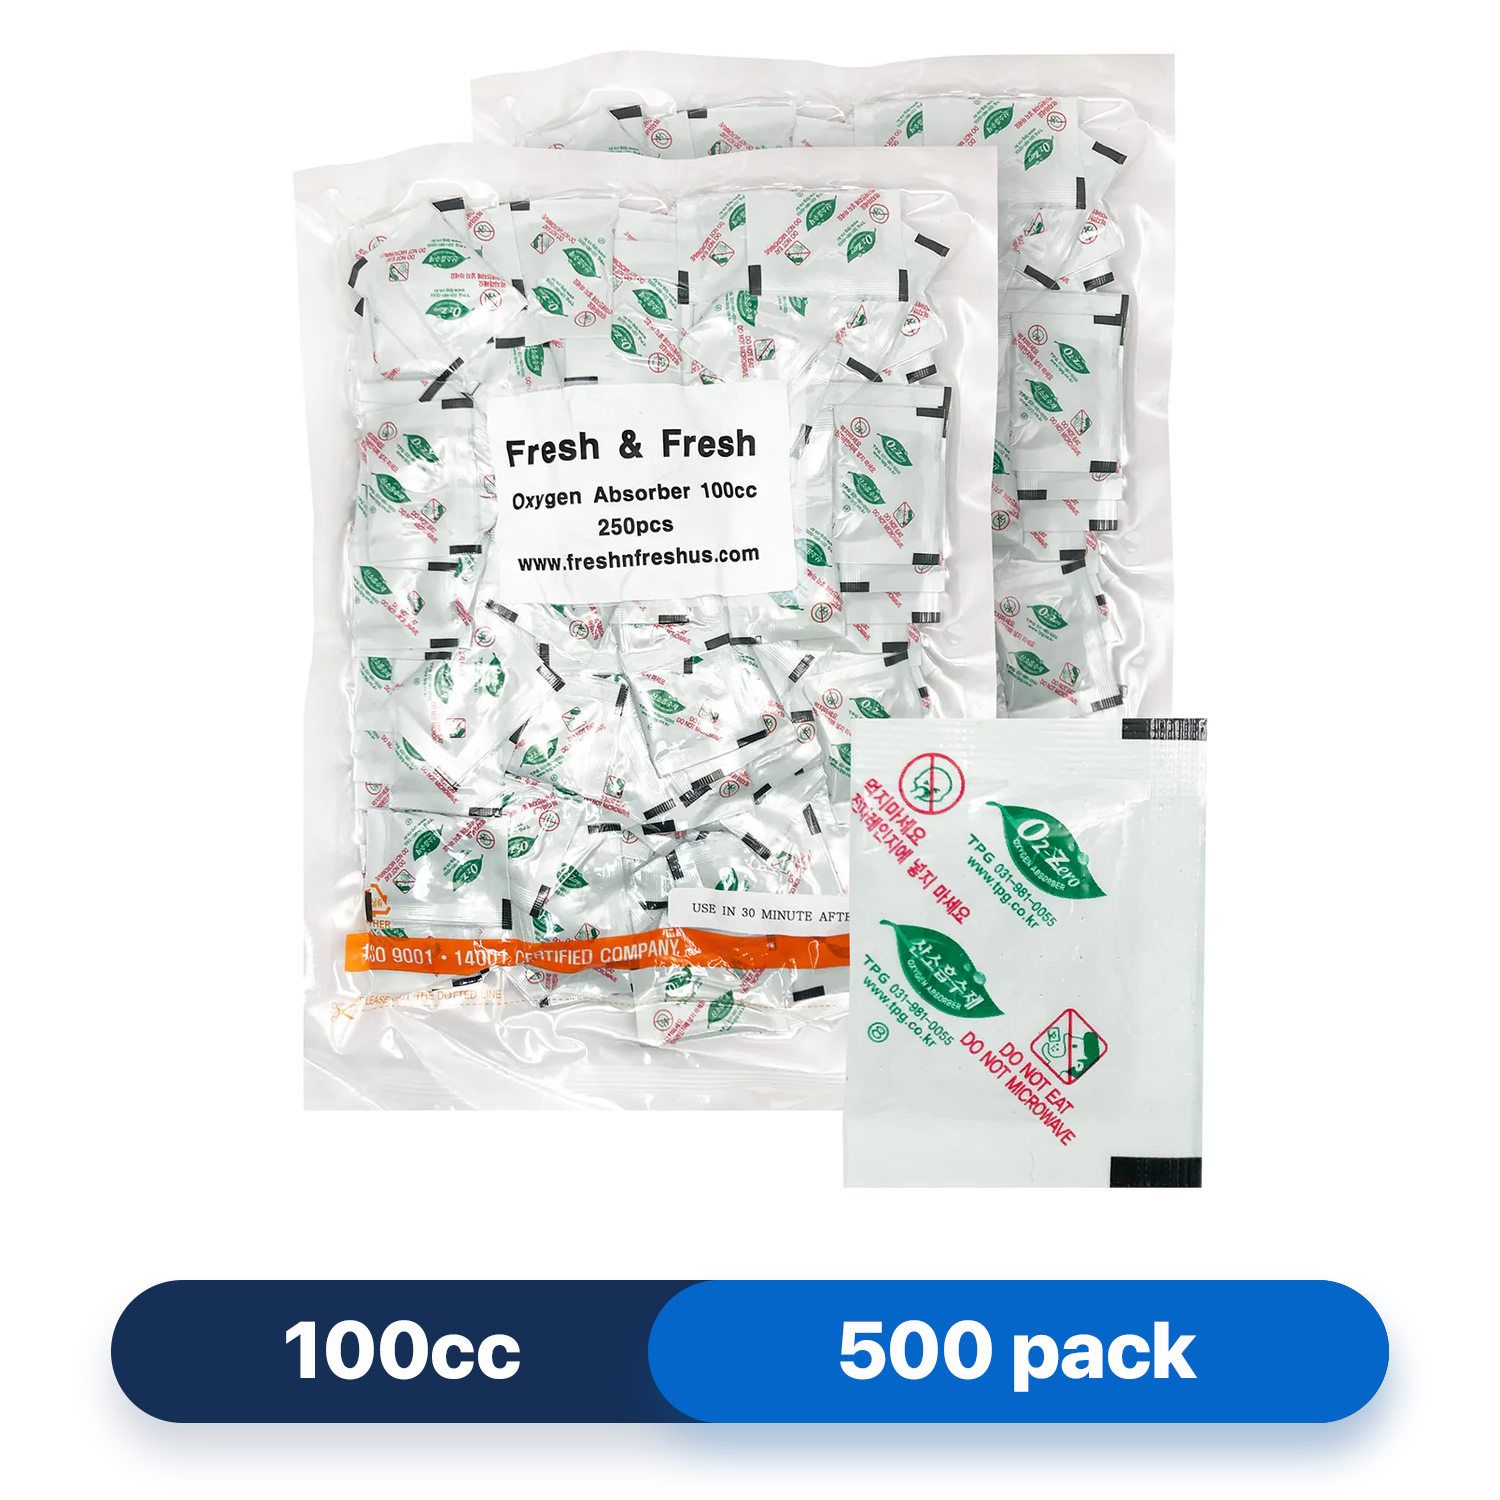 Fresh & Fresh (500 Packs) 100 CC Premium Oxygen Absorbers(2 Bag of 250 Packets) - ISO 9001 & 14001 Certified Facility Manufactured